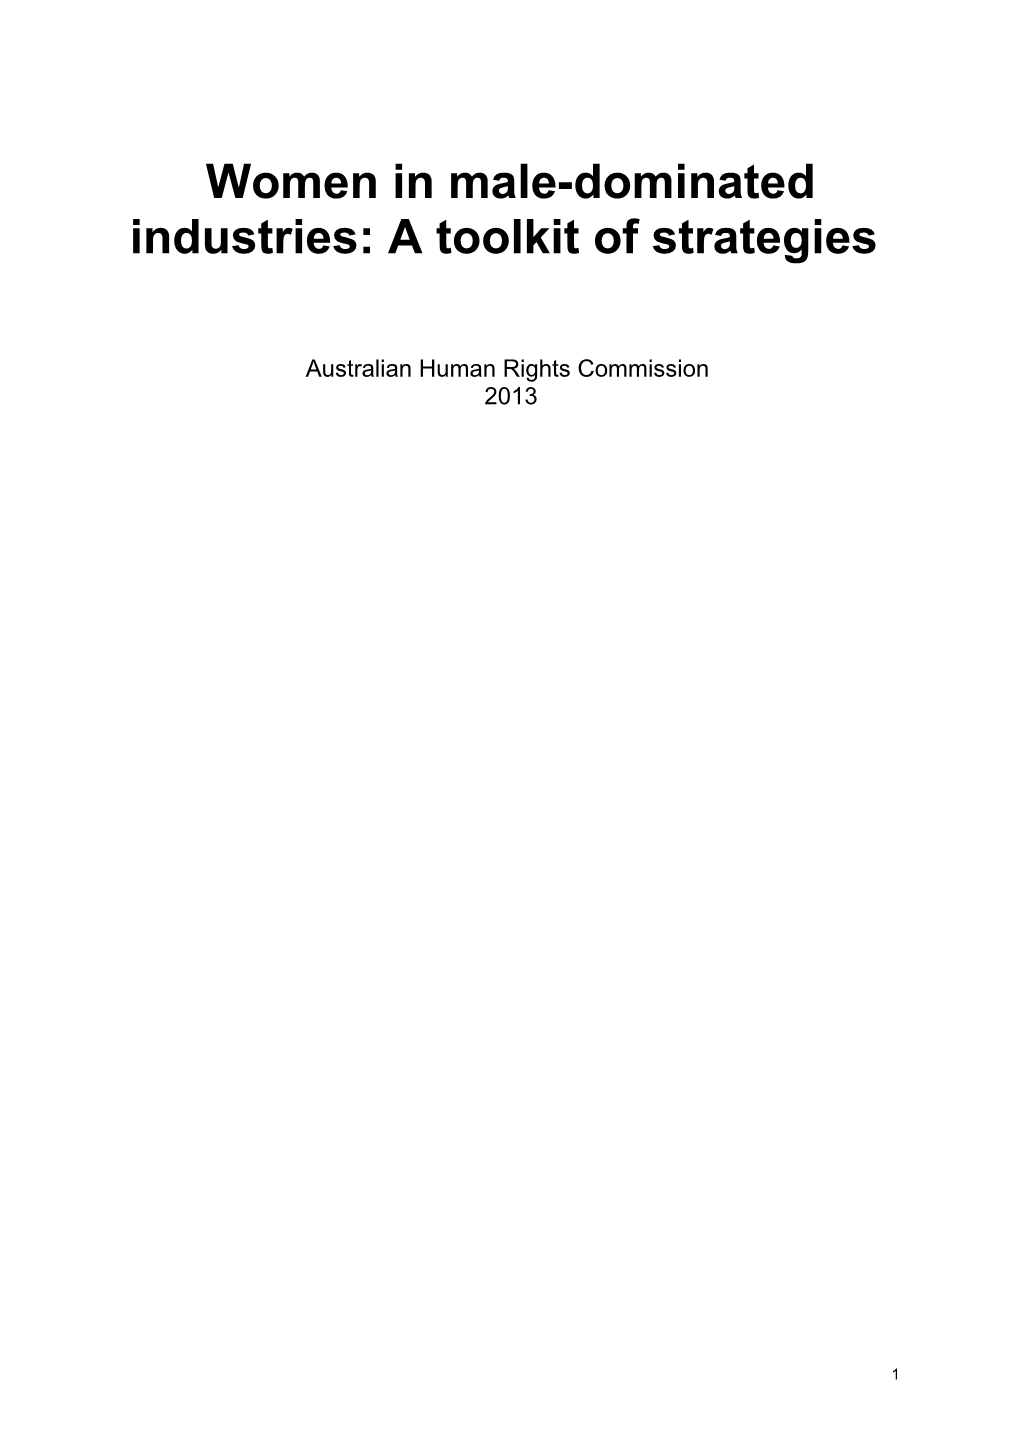 Women in Male-Dominated Industries: a Toolkit of Strategies